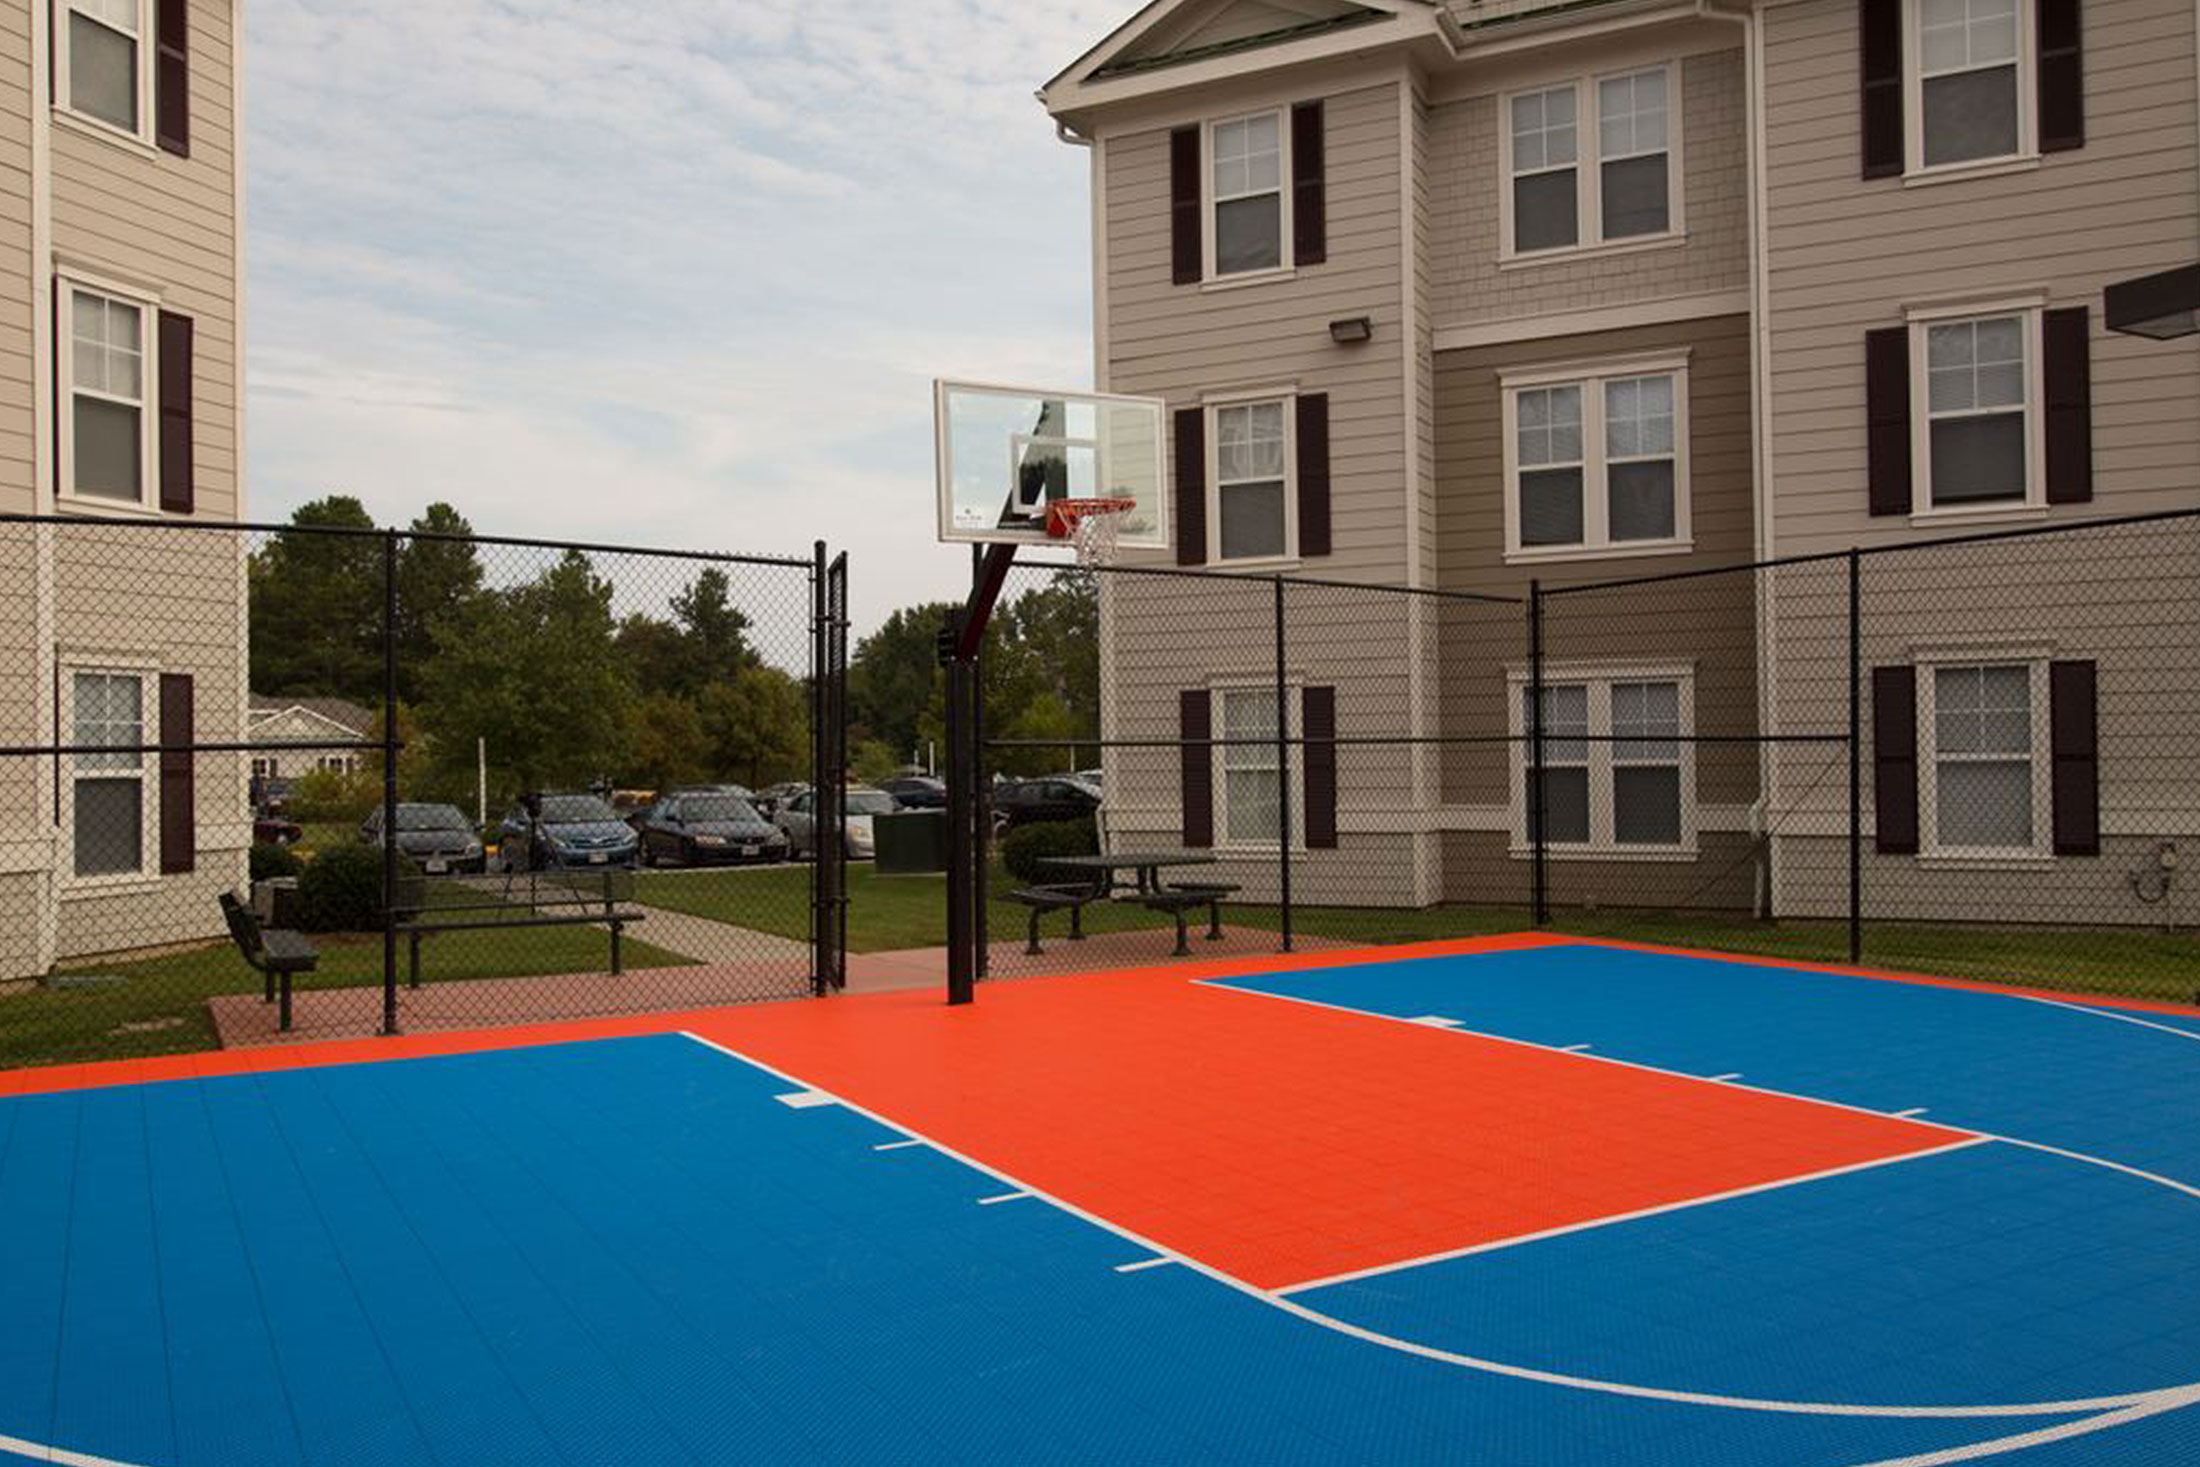 Gated basketball court with single net and benches.